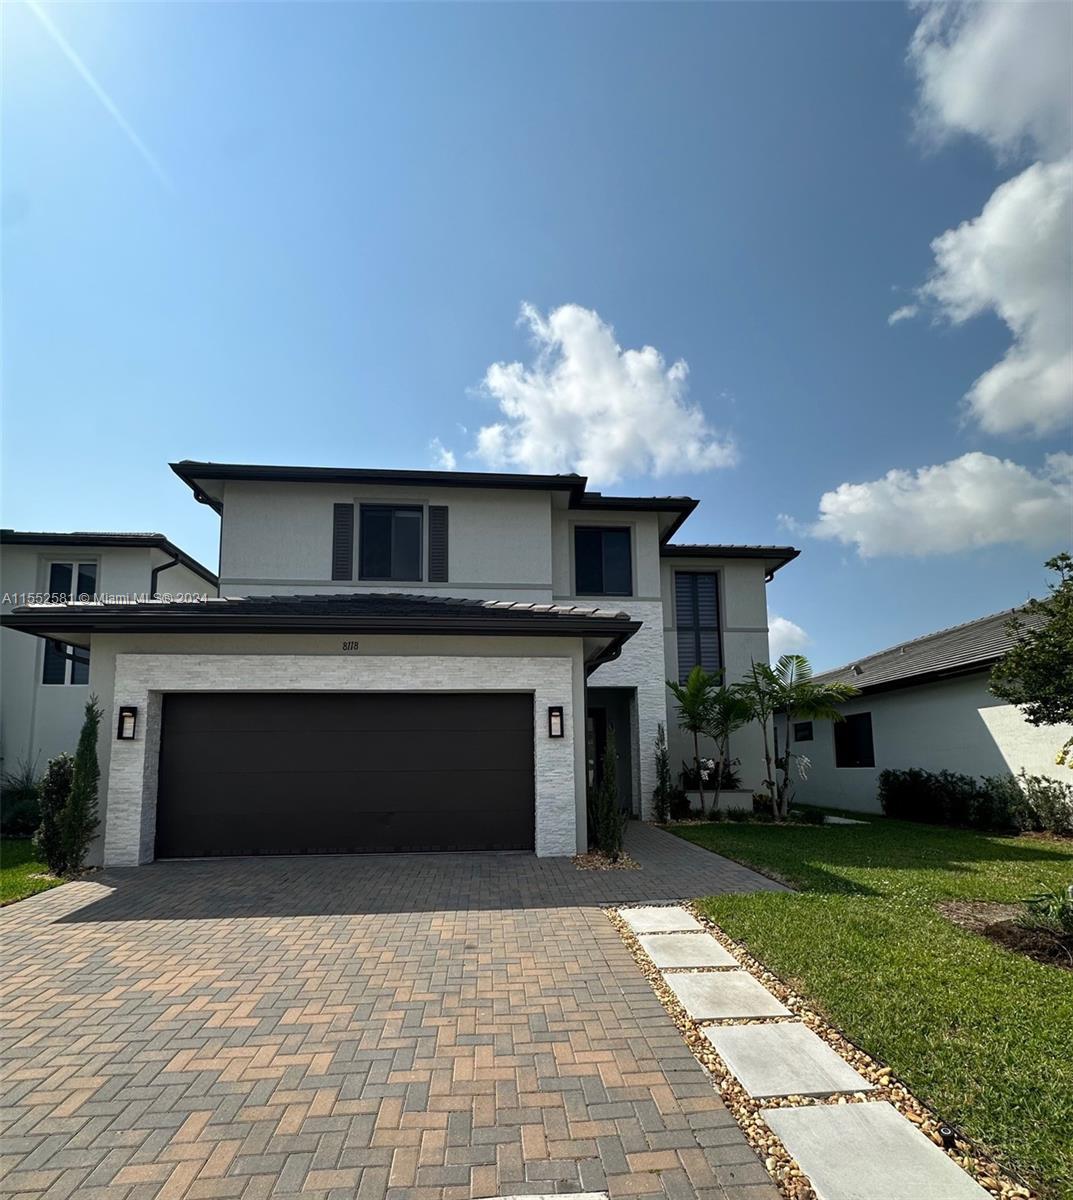 Photo of 8118 NW 46th Ter in Doral, FL